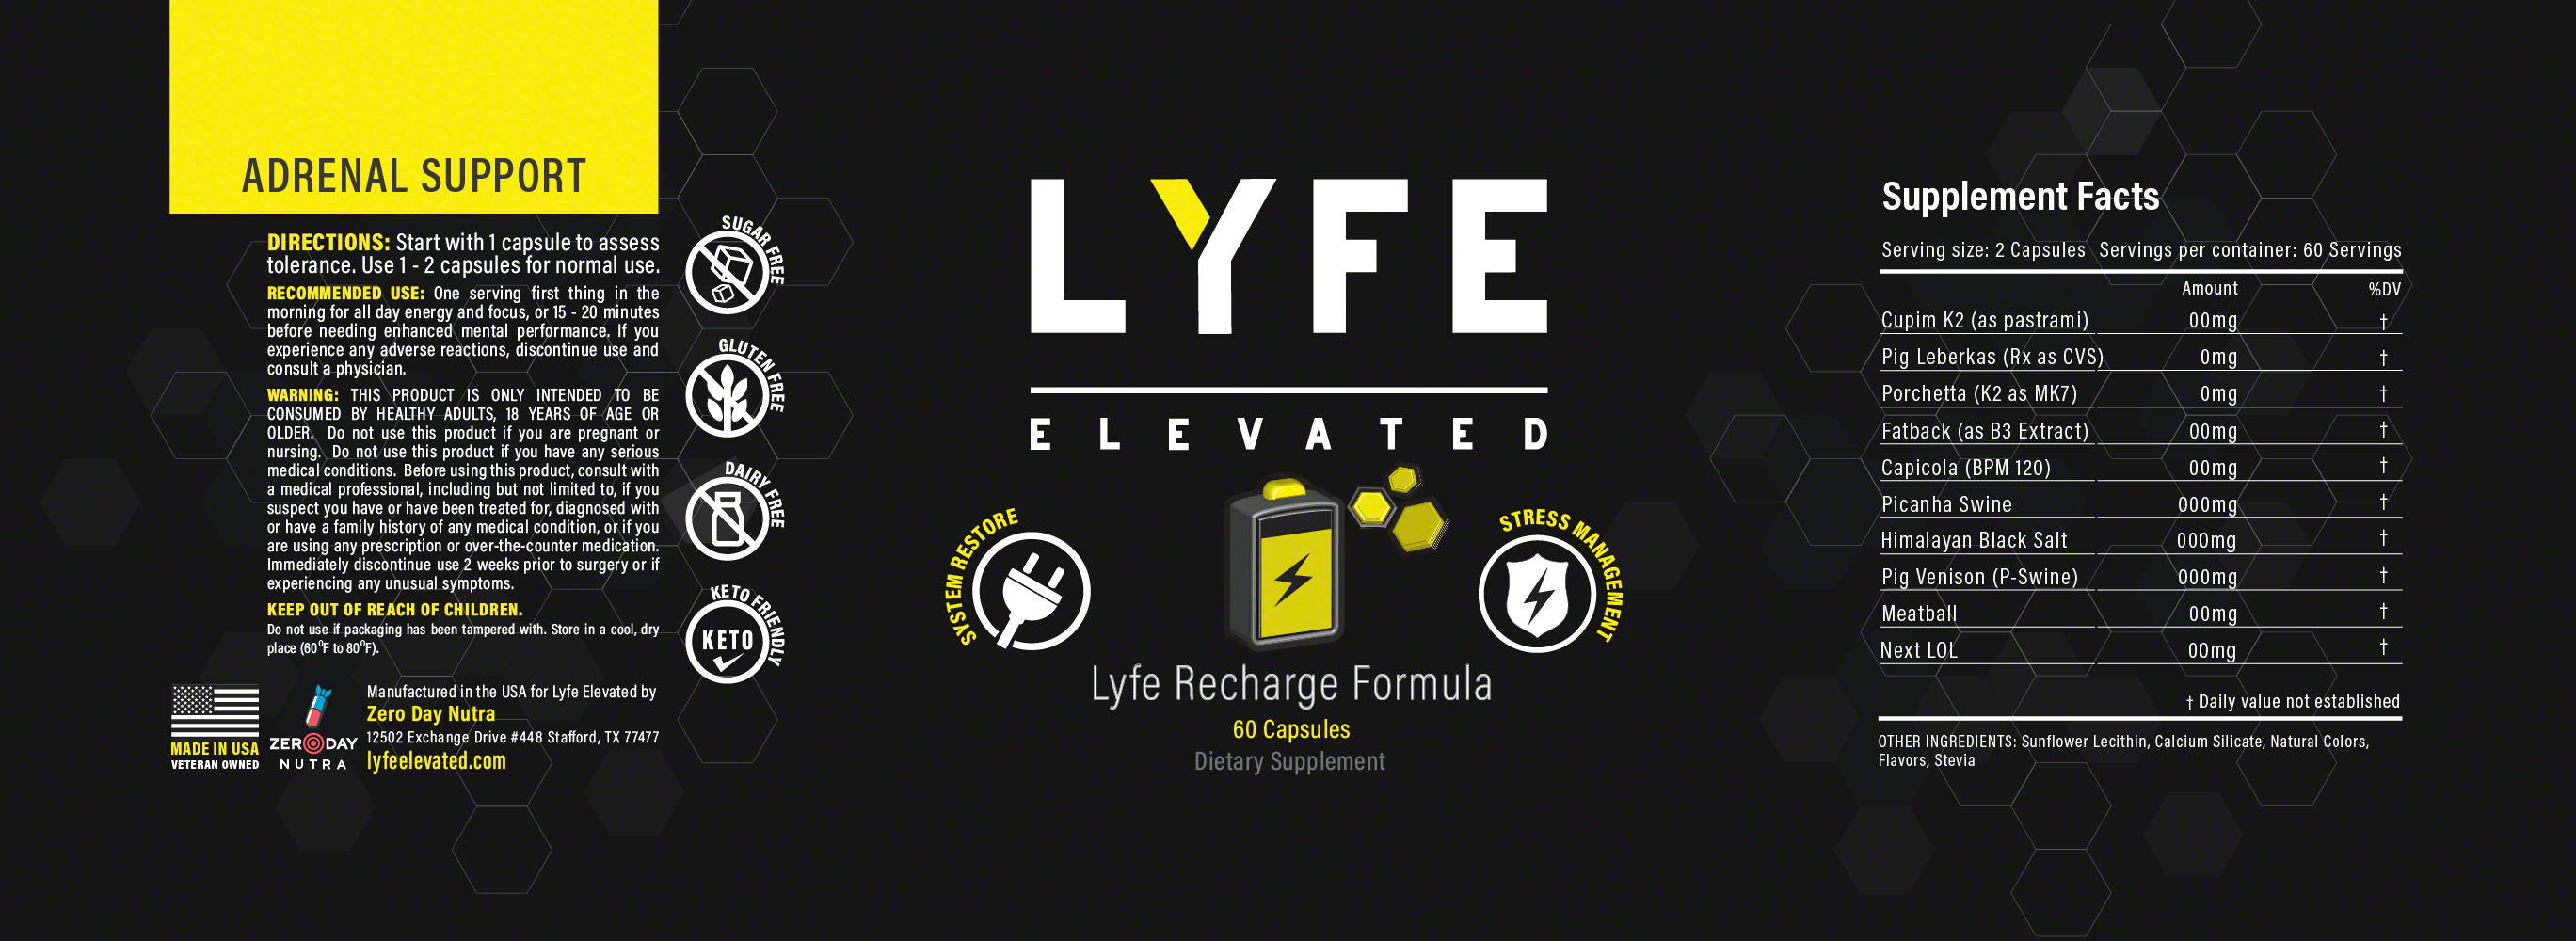 Dalya Kandil\'s logo, brand and marketing design for LyfeElevated. Formulation and marketing by Michael Ulisse.